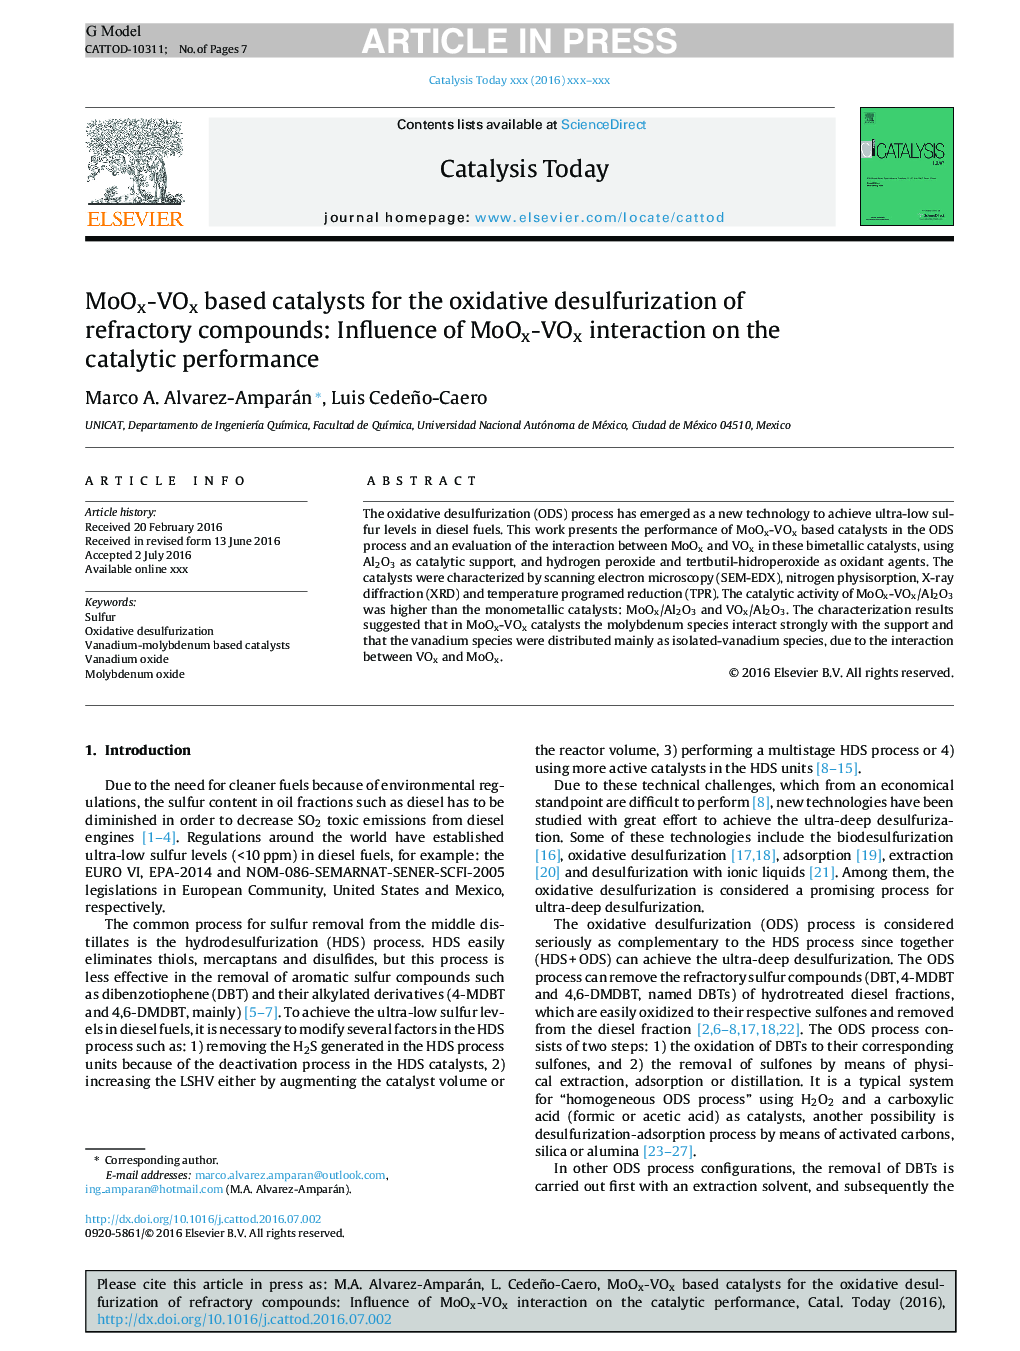 MoOx-VOx based catalysts for the oxidative desulfurization of refractory compounds: Influence of MoOx-VOx interaction on the catalytic performance